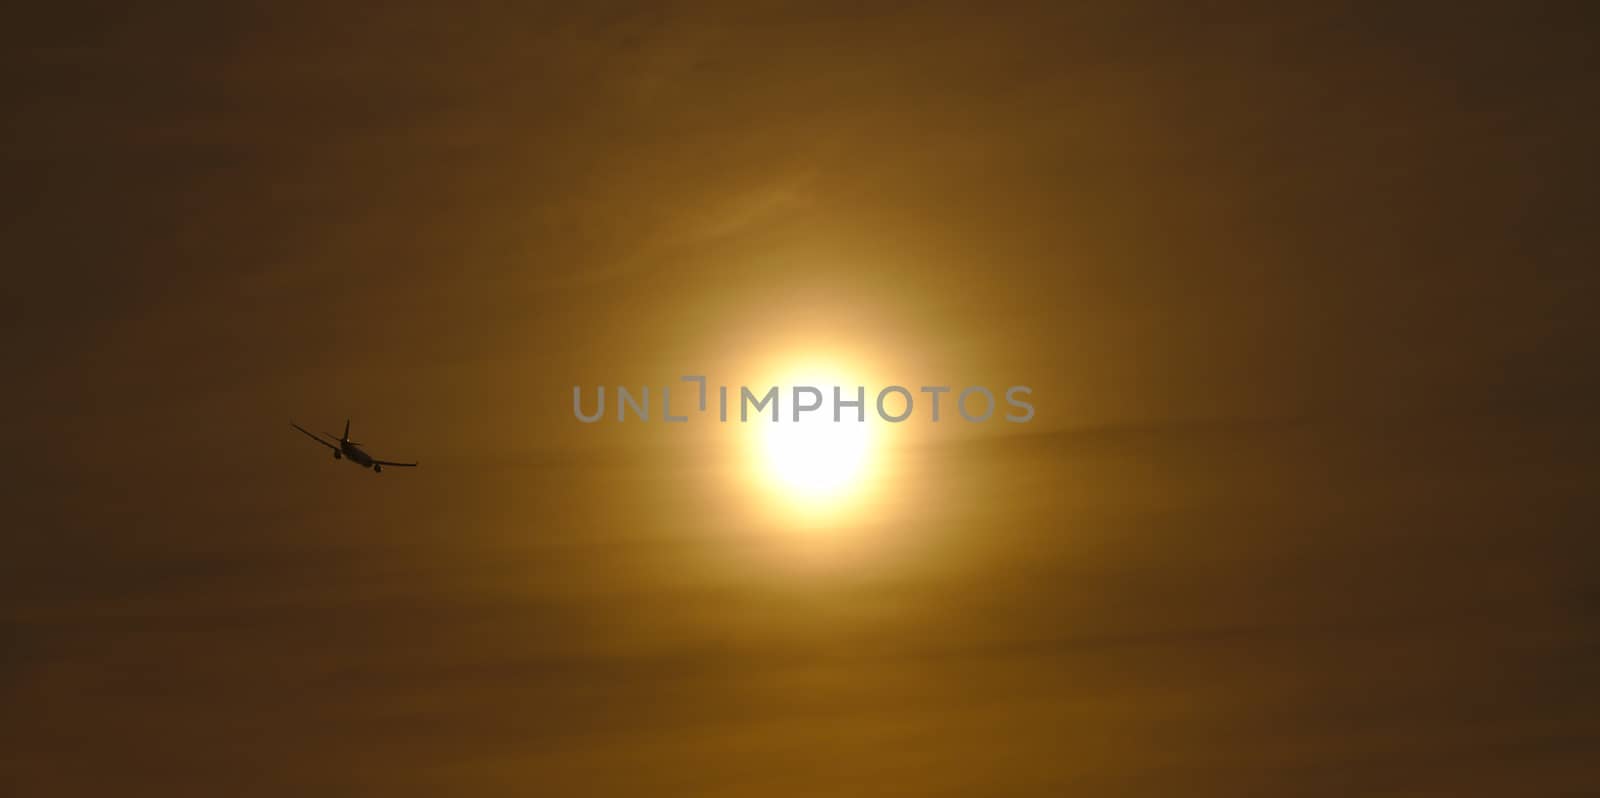 Plane flying away into the evening sun. Dark silhouette of the aircraft visible on the left side of large foggy sun.